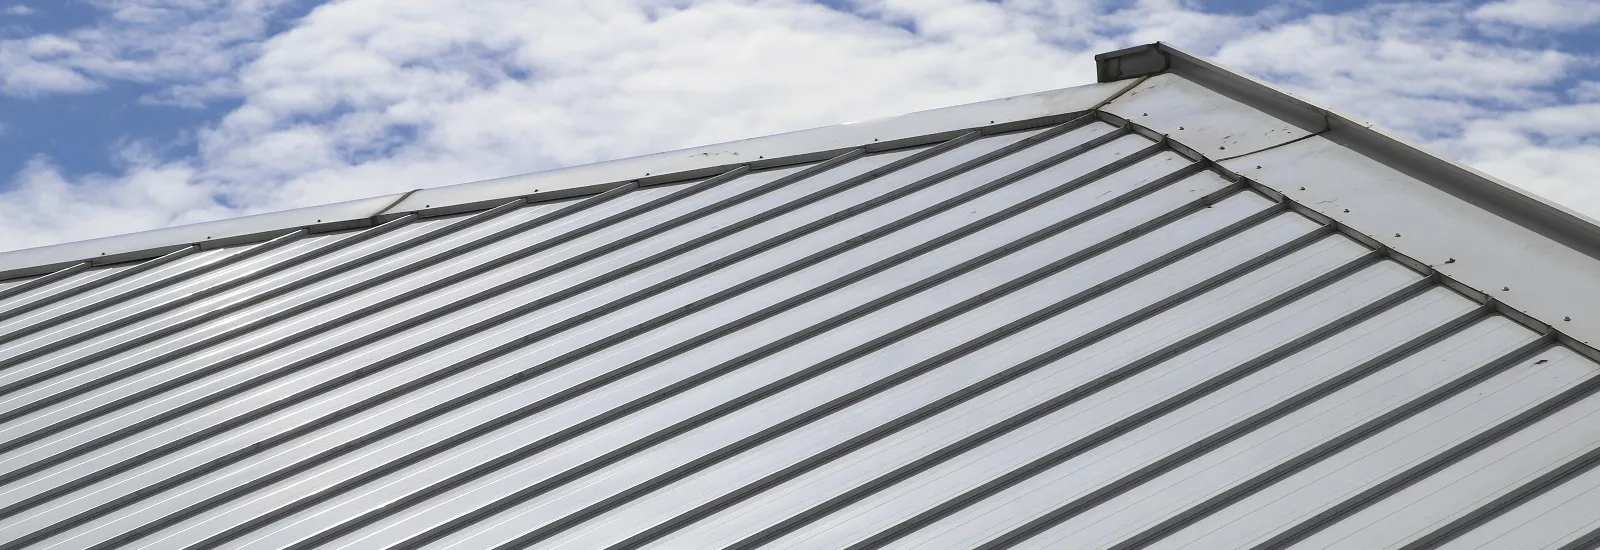 Tips for Preventing Your Metal Roof from Rusting